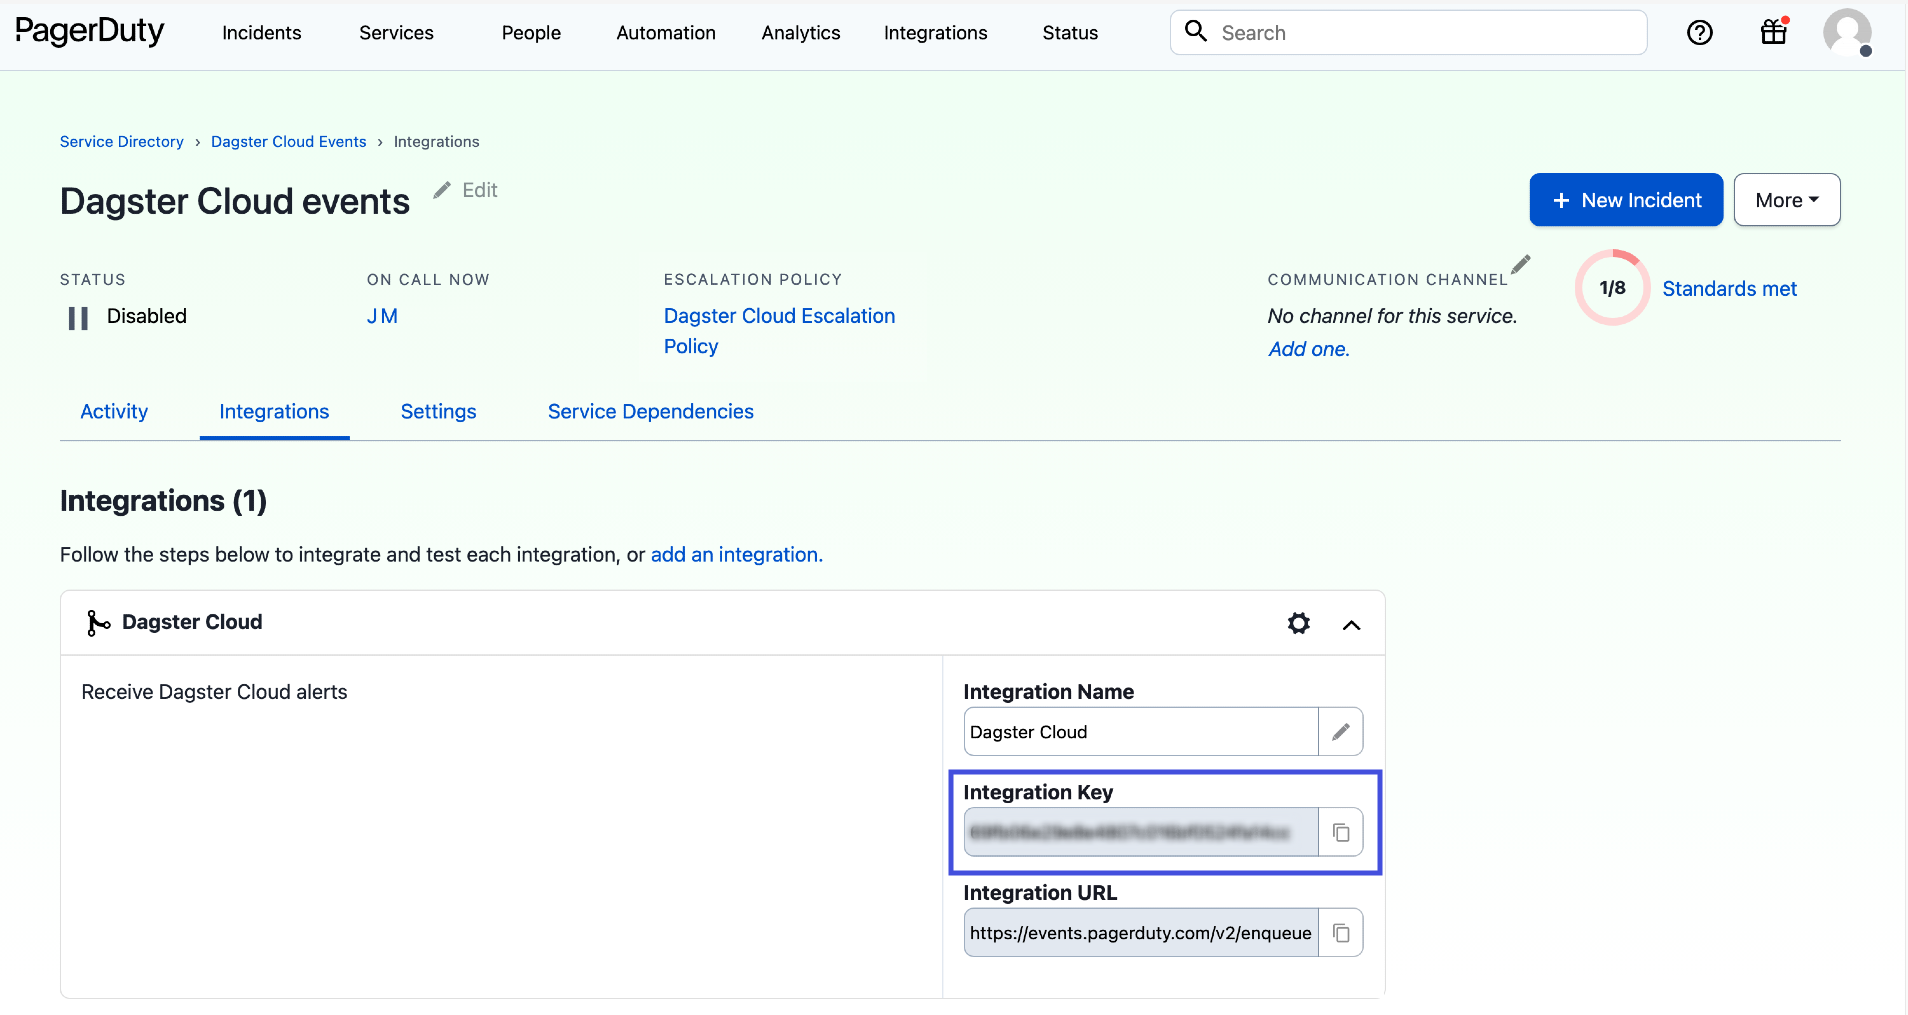 Highlighted integration key field in the PagerDuty UI